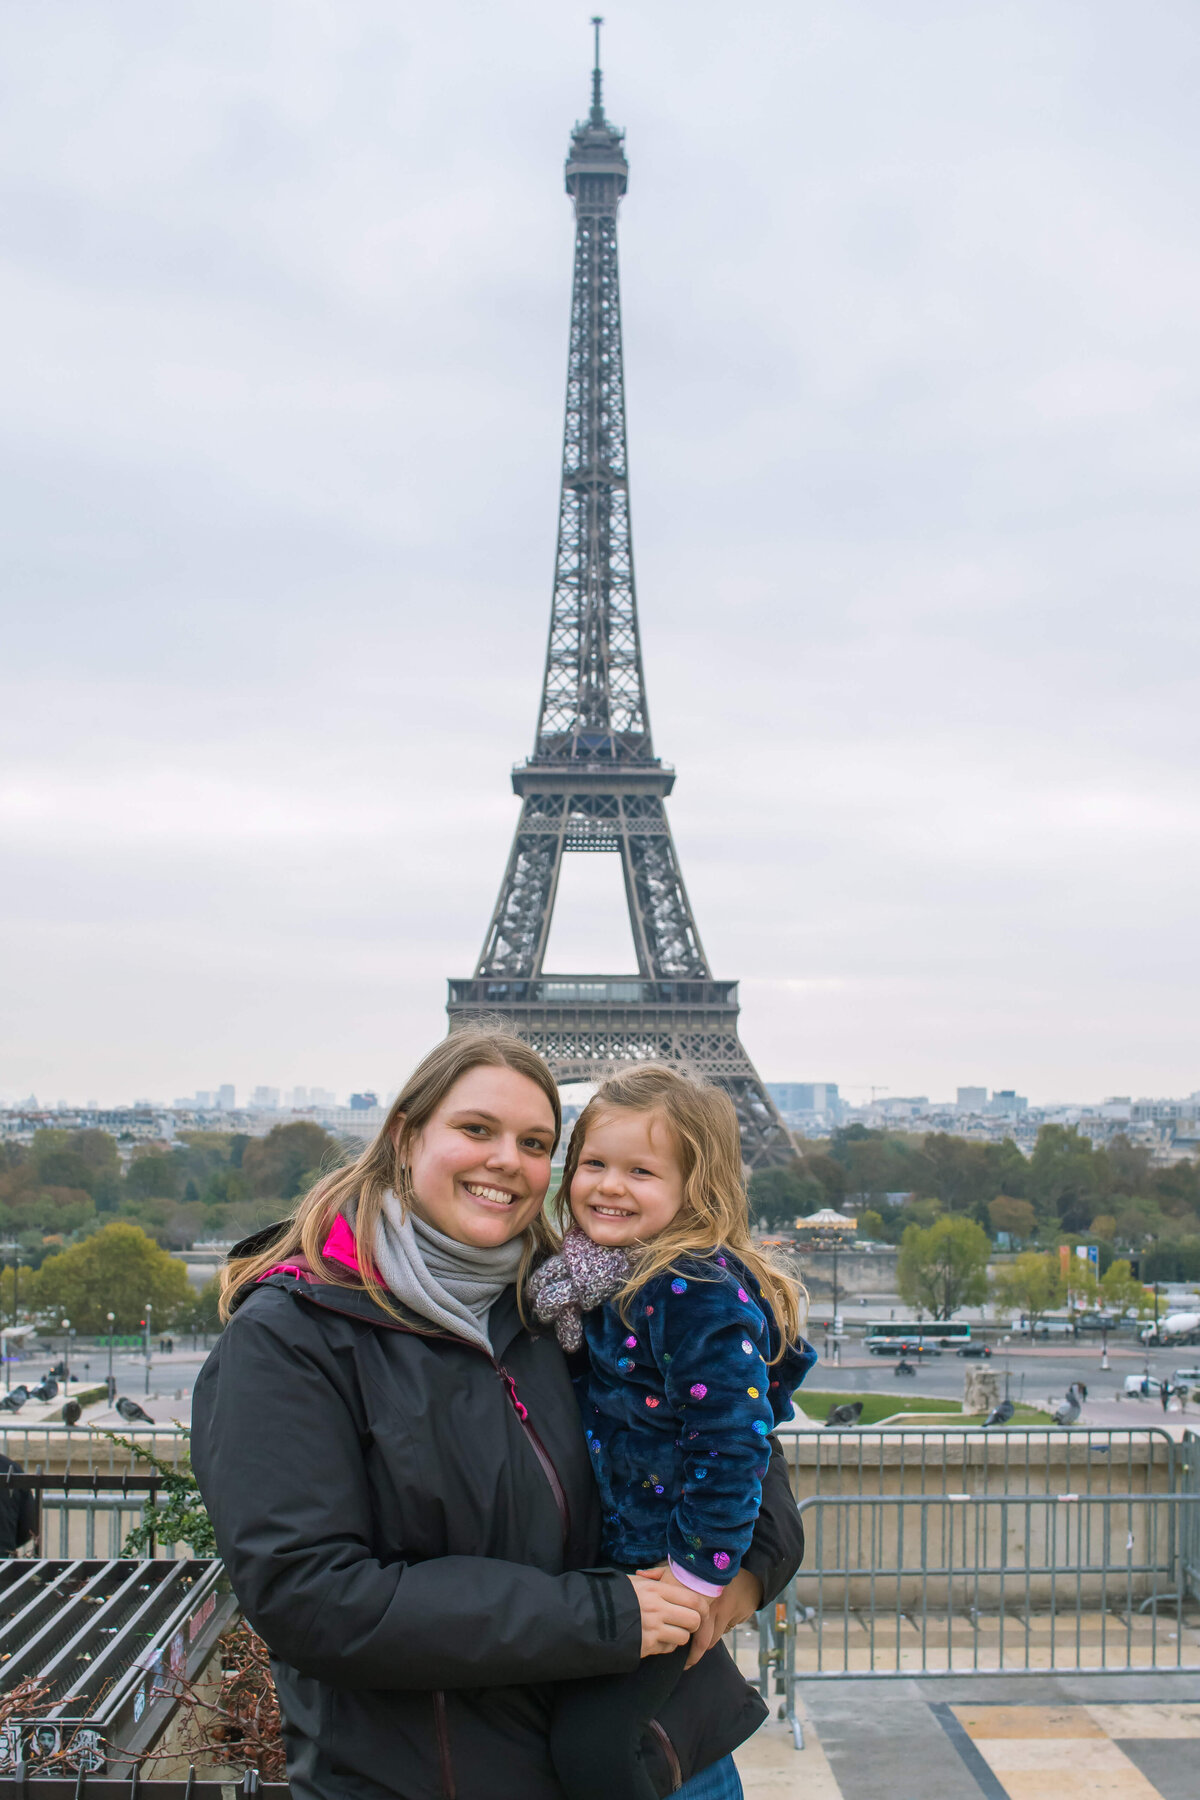 A picture of me and my daughter posing in front of the Eiffel Tower in Paris.